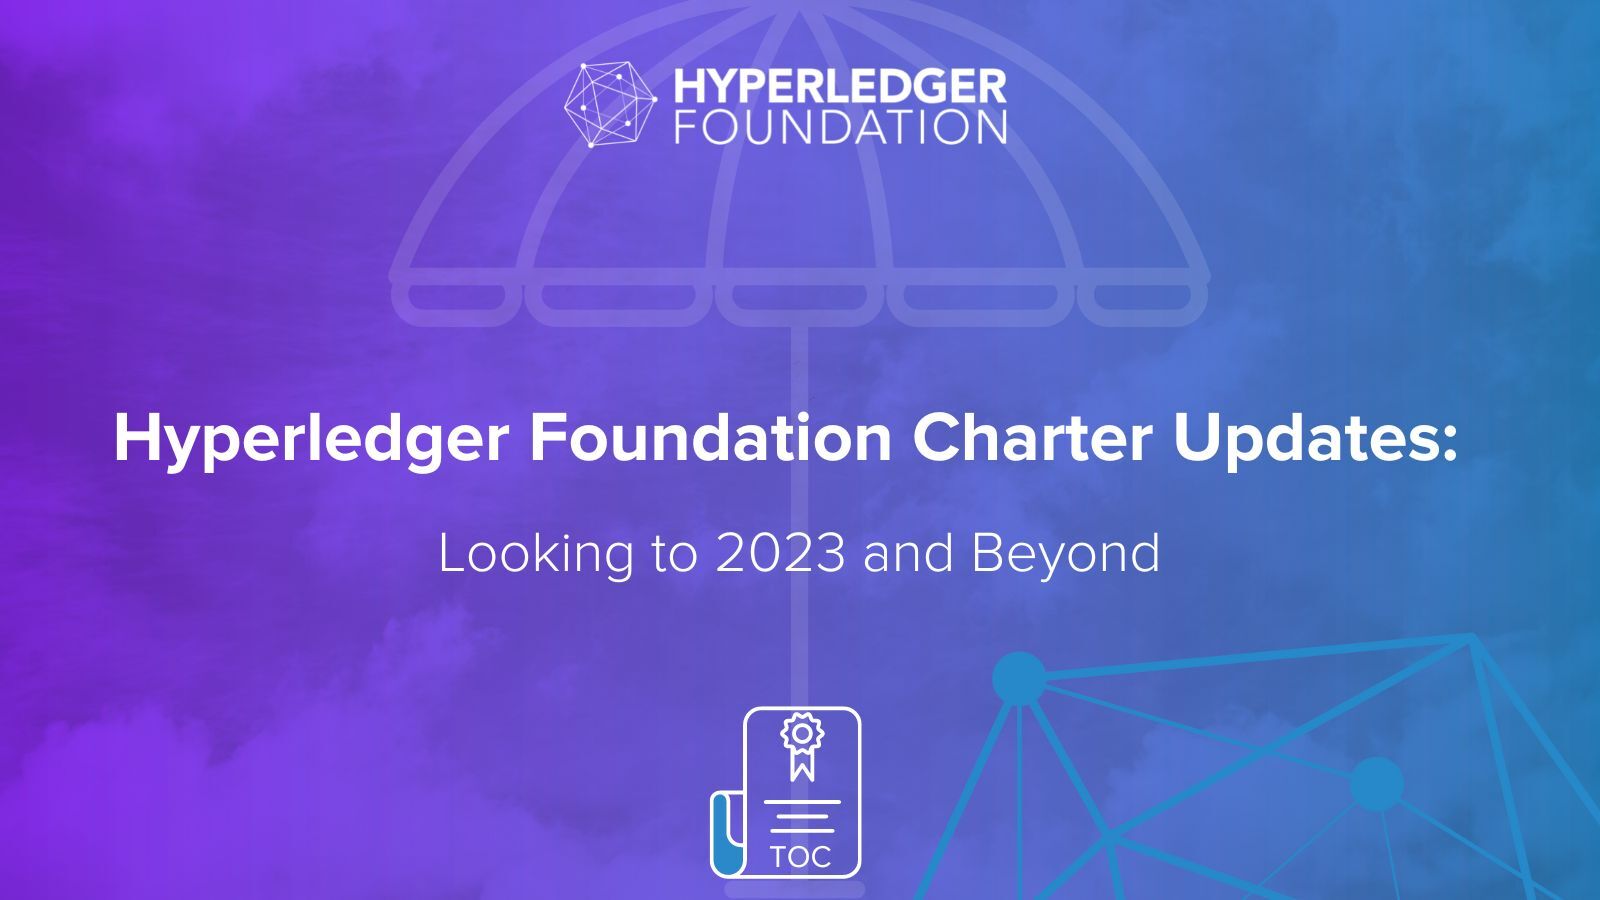 Hyperledger Foundation Charter Updates: Looking to 2023 and Beyond